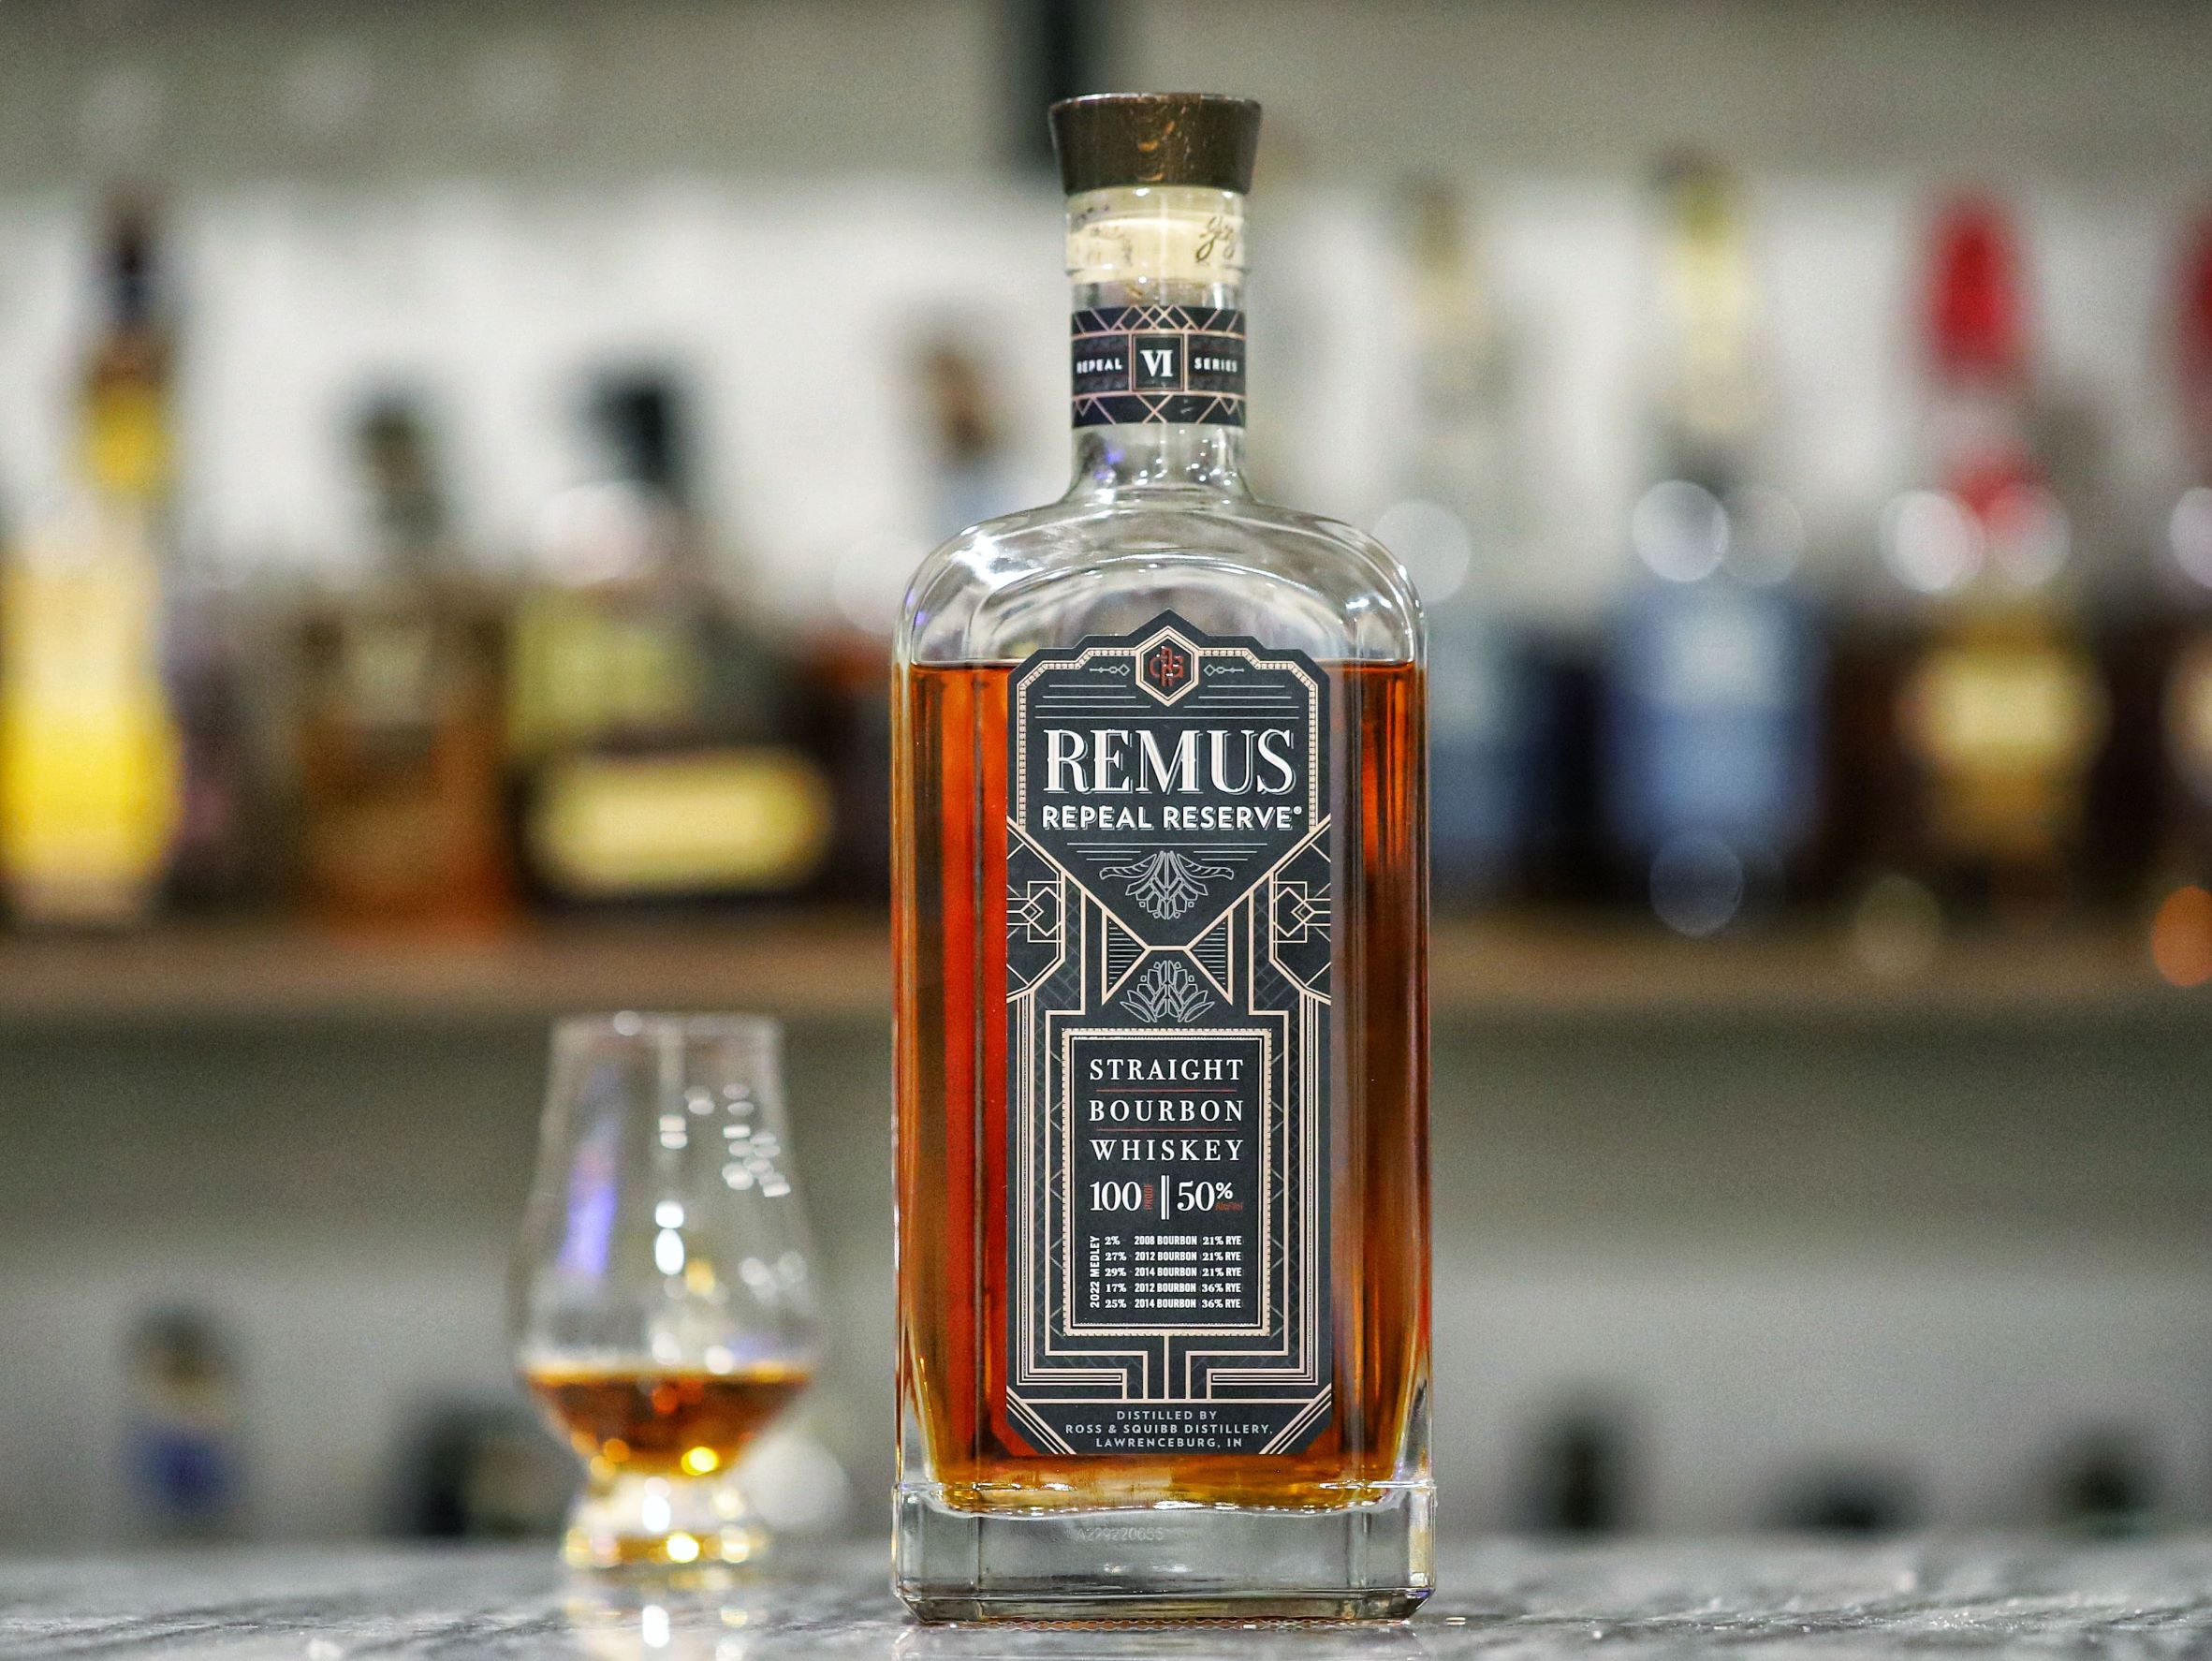 Remus Repeal Reserve Straight Bourbon Whiskey (Batch 6)